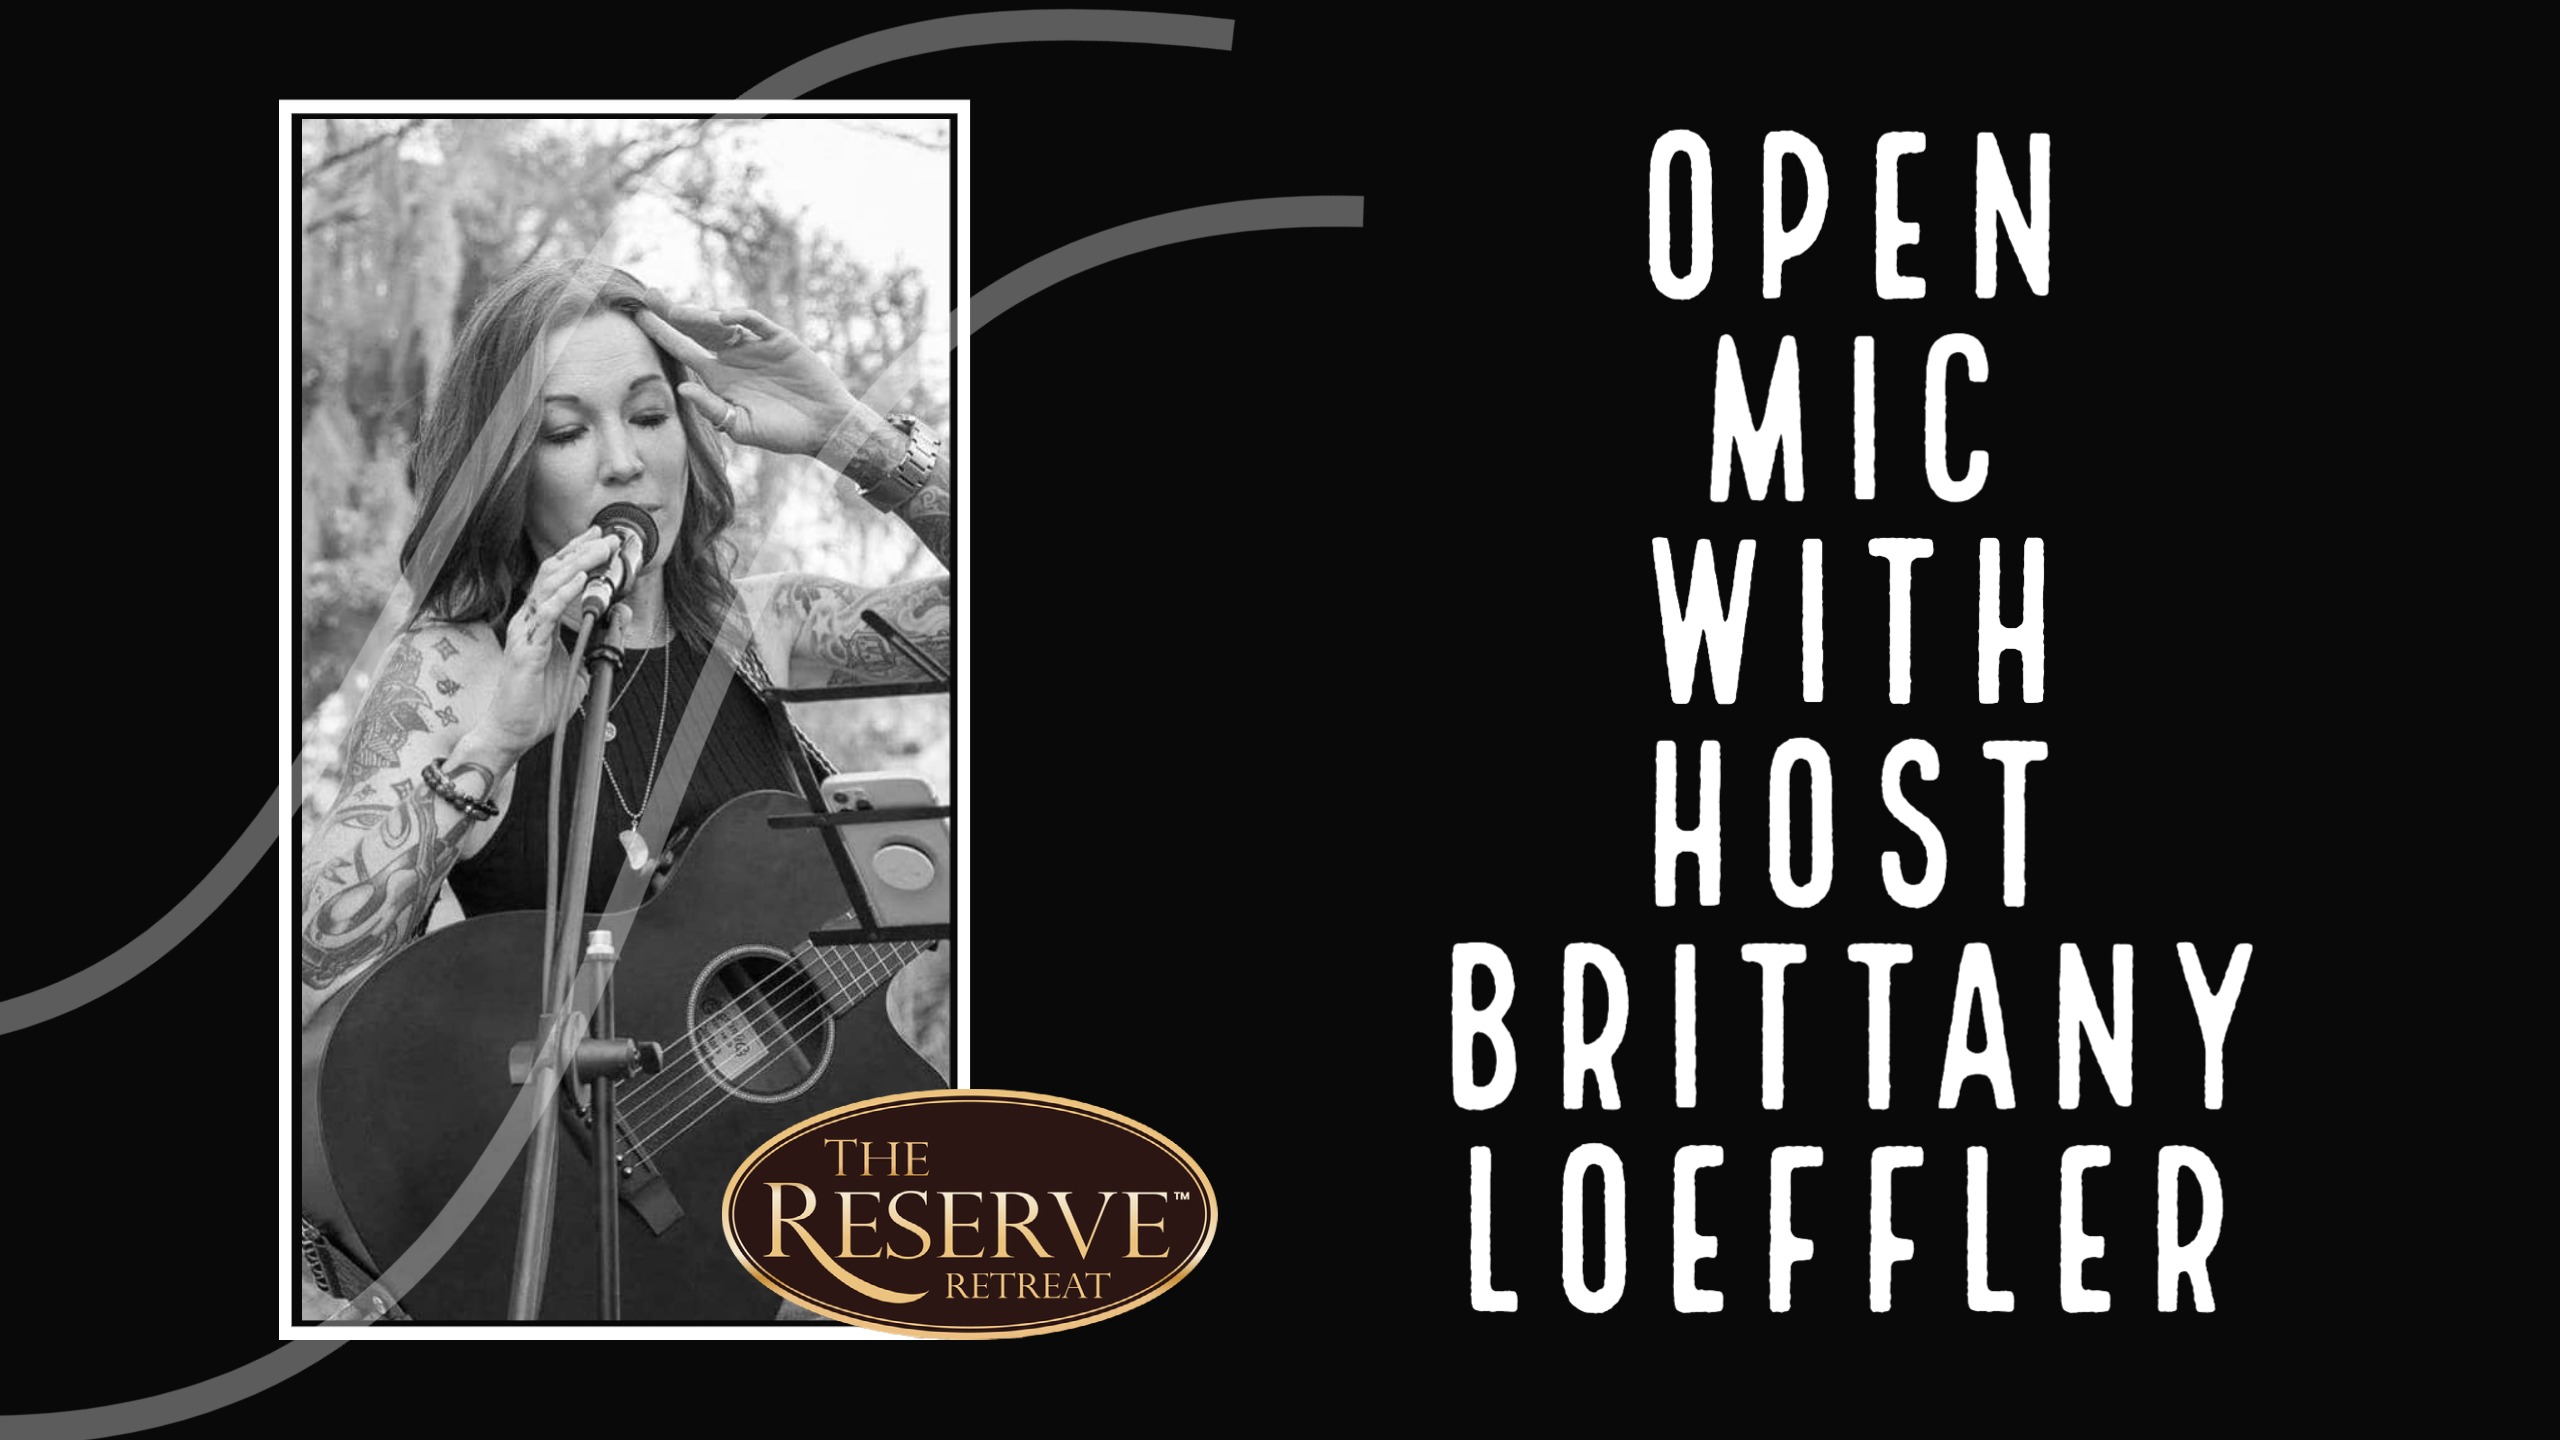 Open Mic night with host Brittany Loeffler